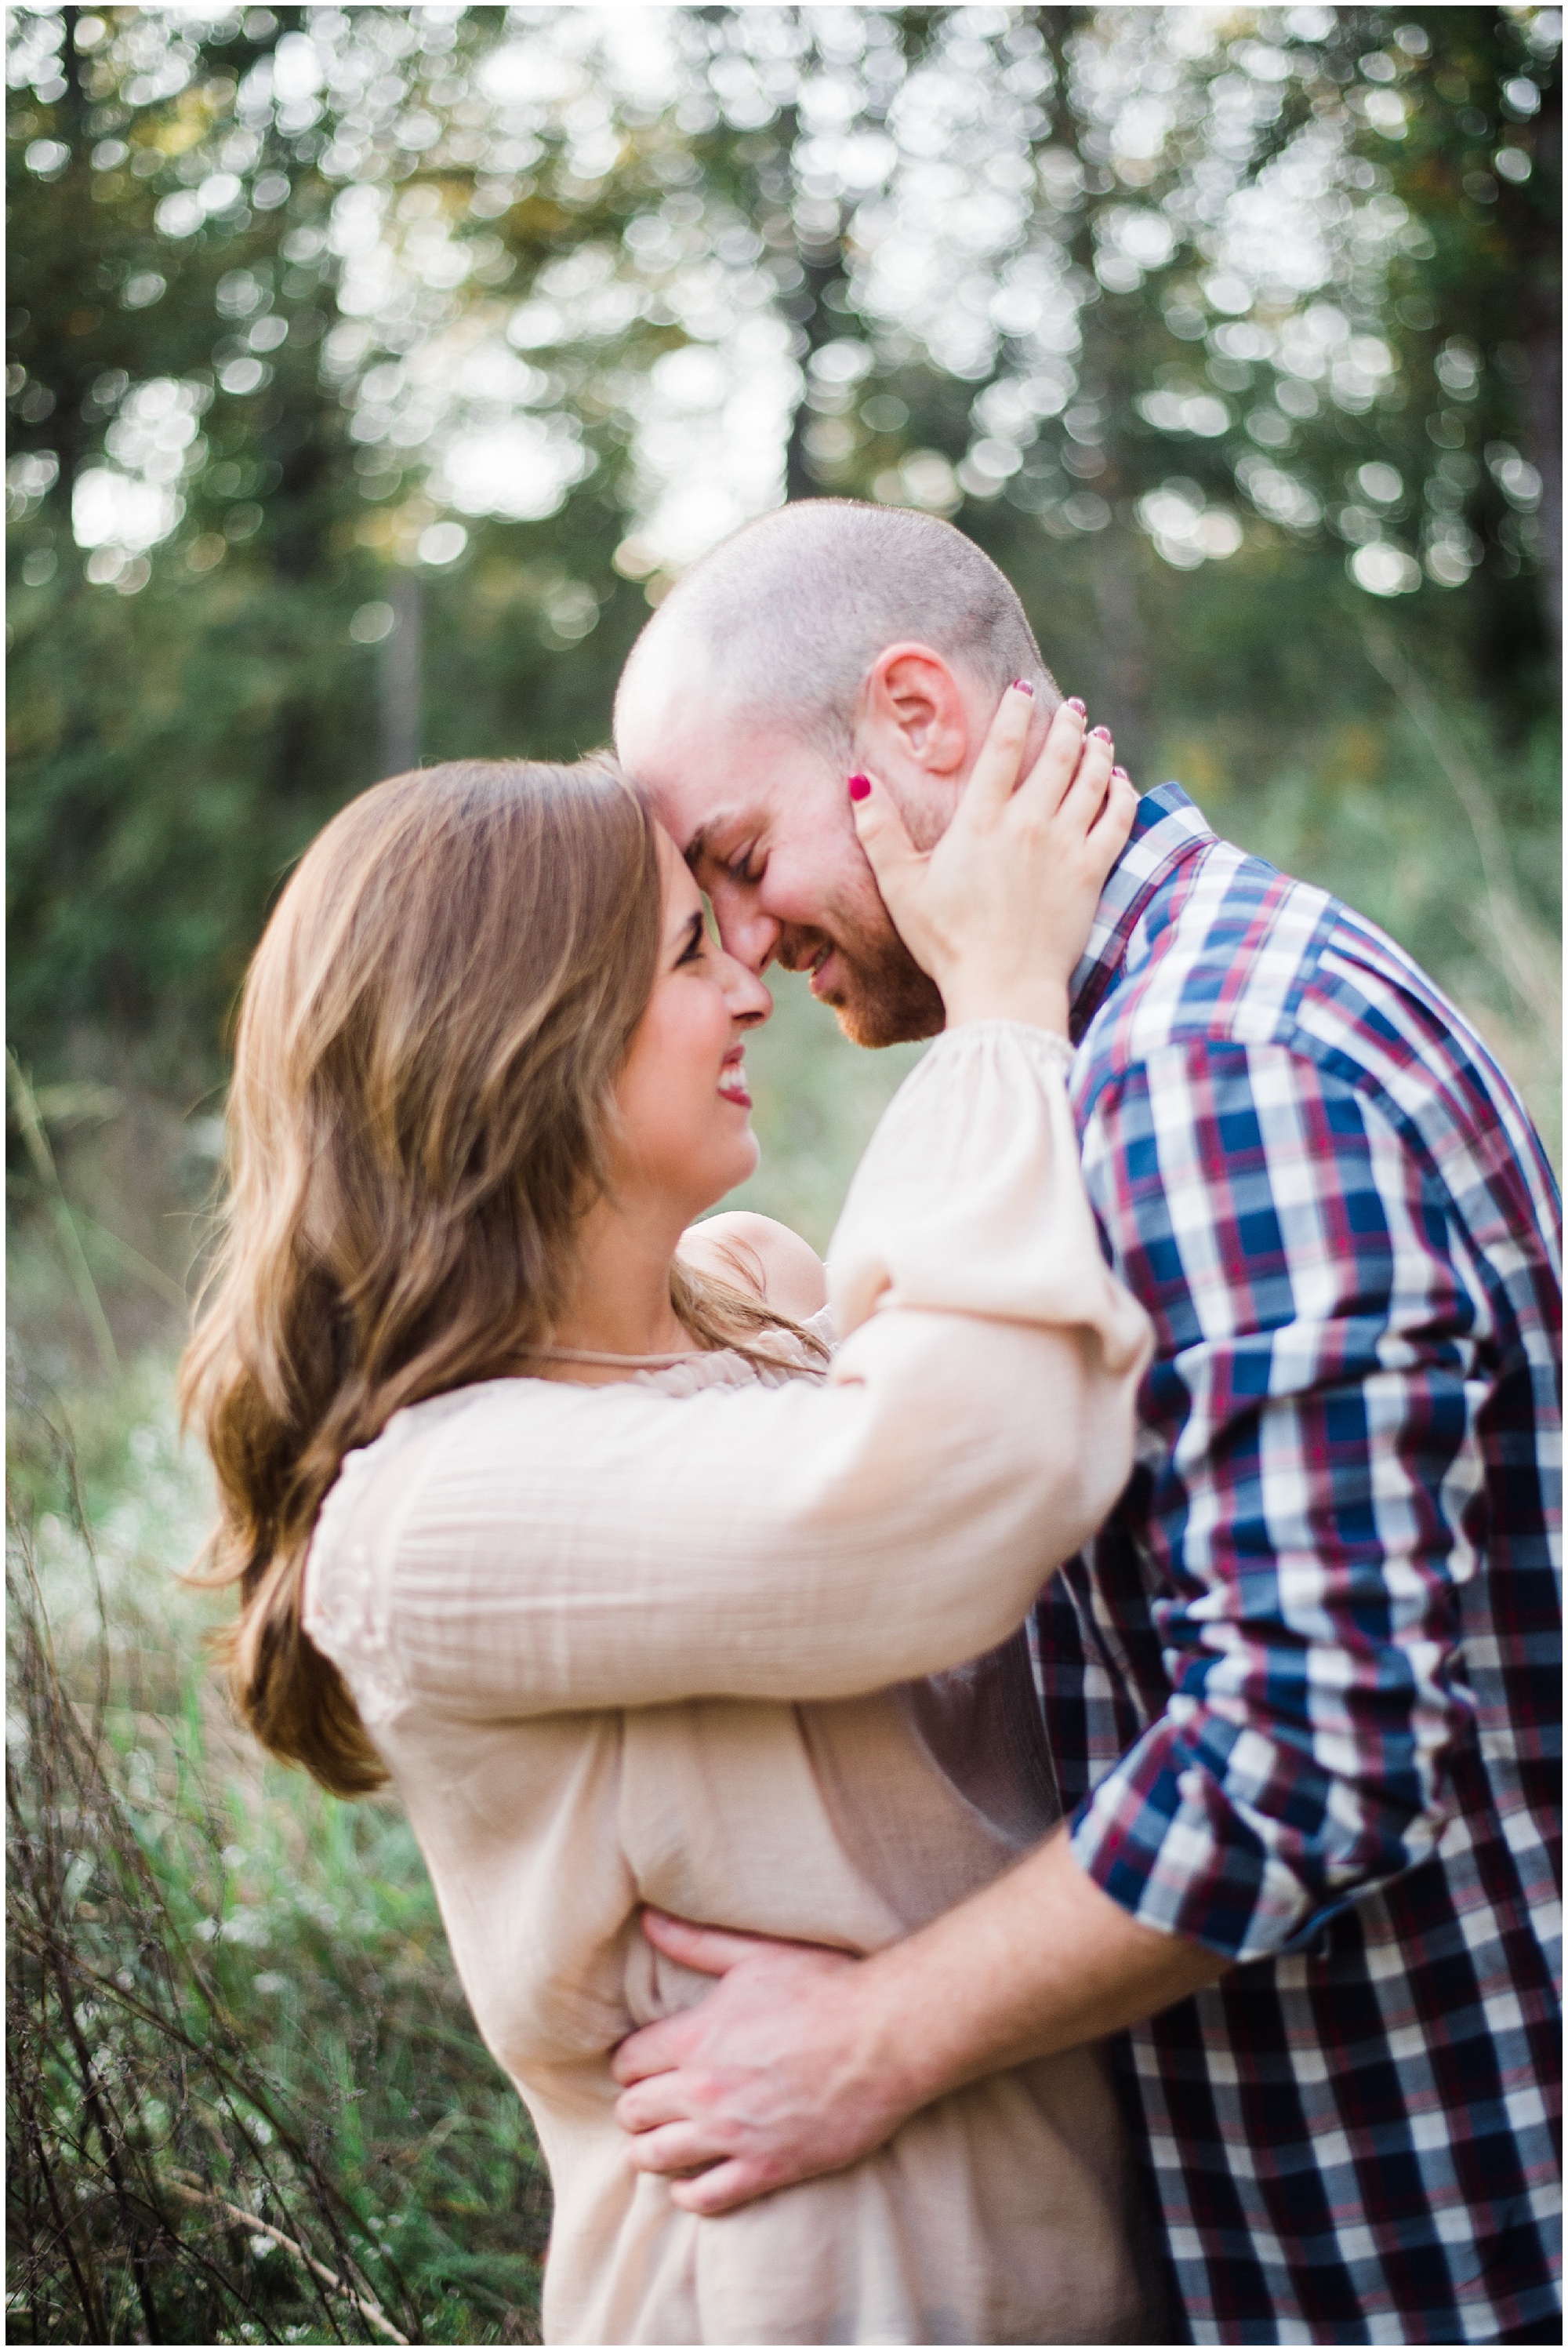 Mallory and Drew || Wedding Photographer || Moss Rock Engagement Session || Hoover, AL